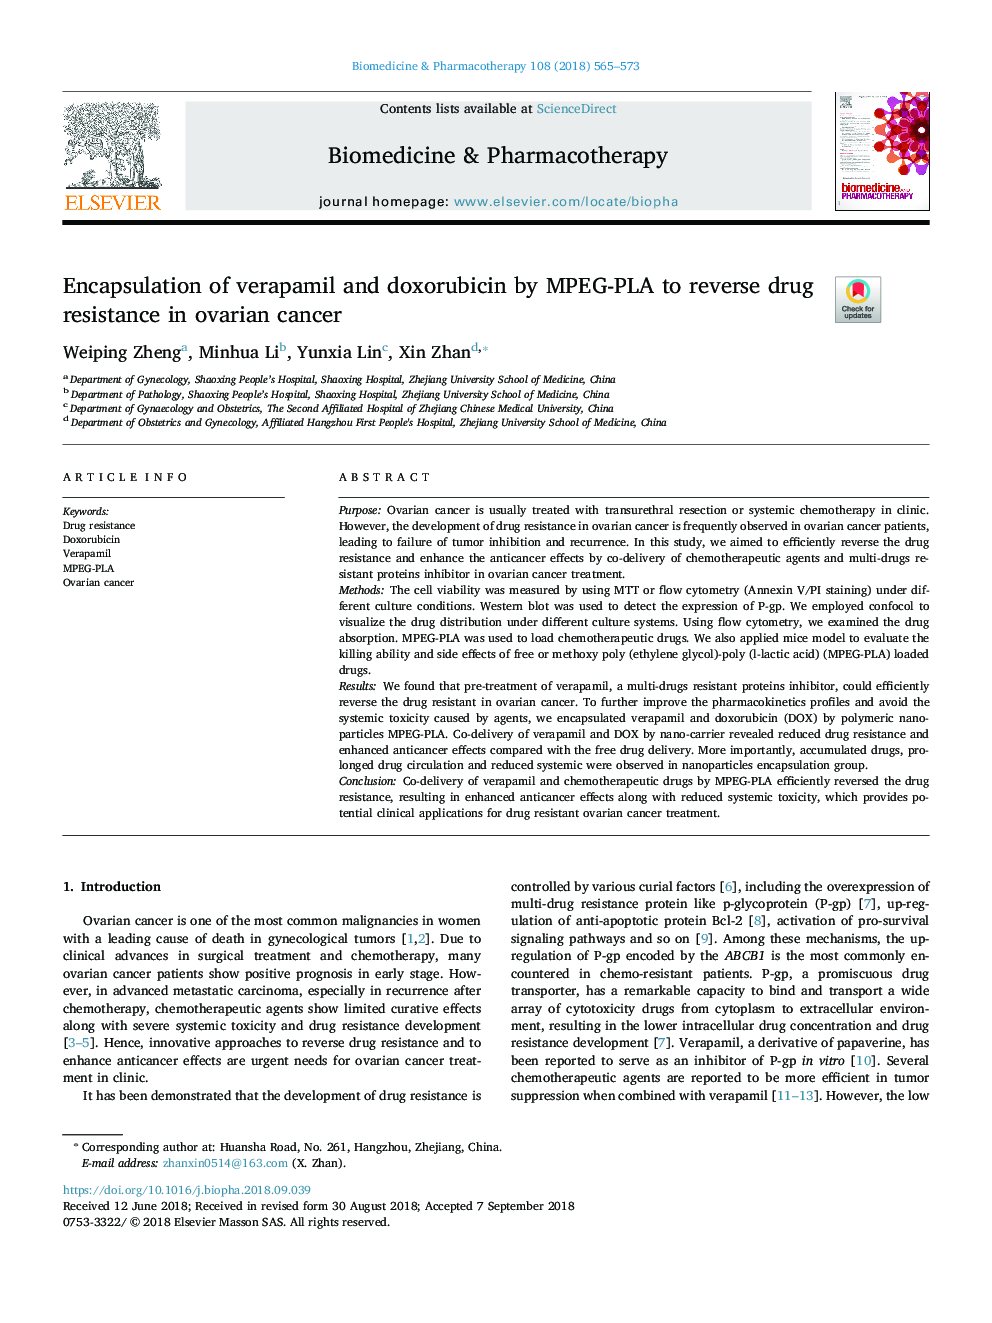 Encapsulation of verapamil and doxorubicin by MPEG-PLA to reverse drug resistance in ovarian cancer